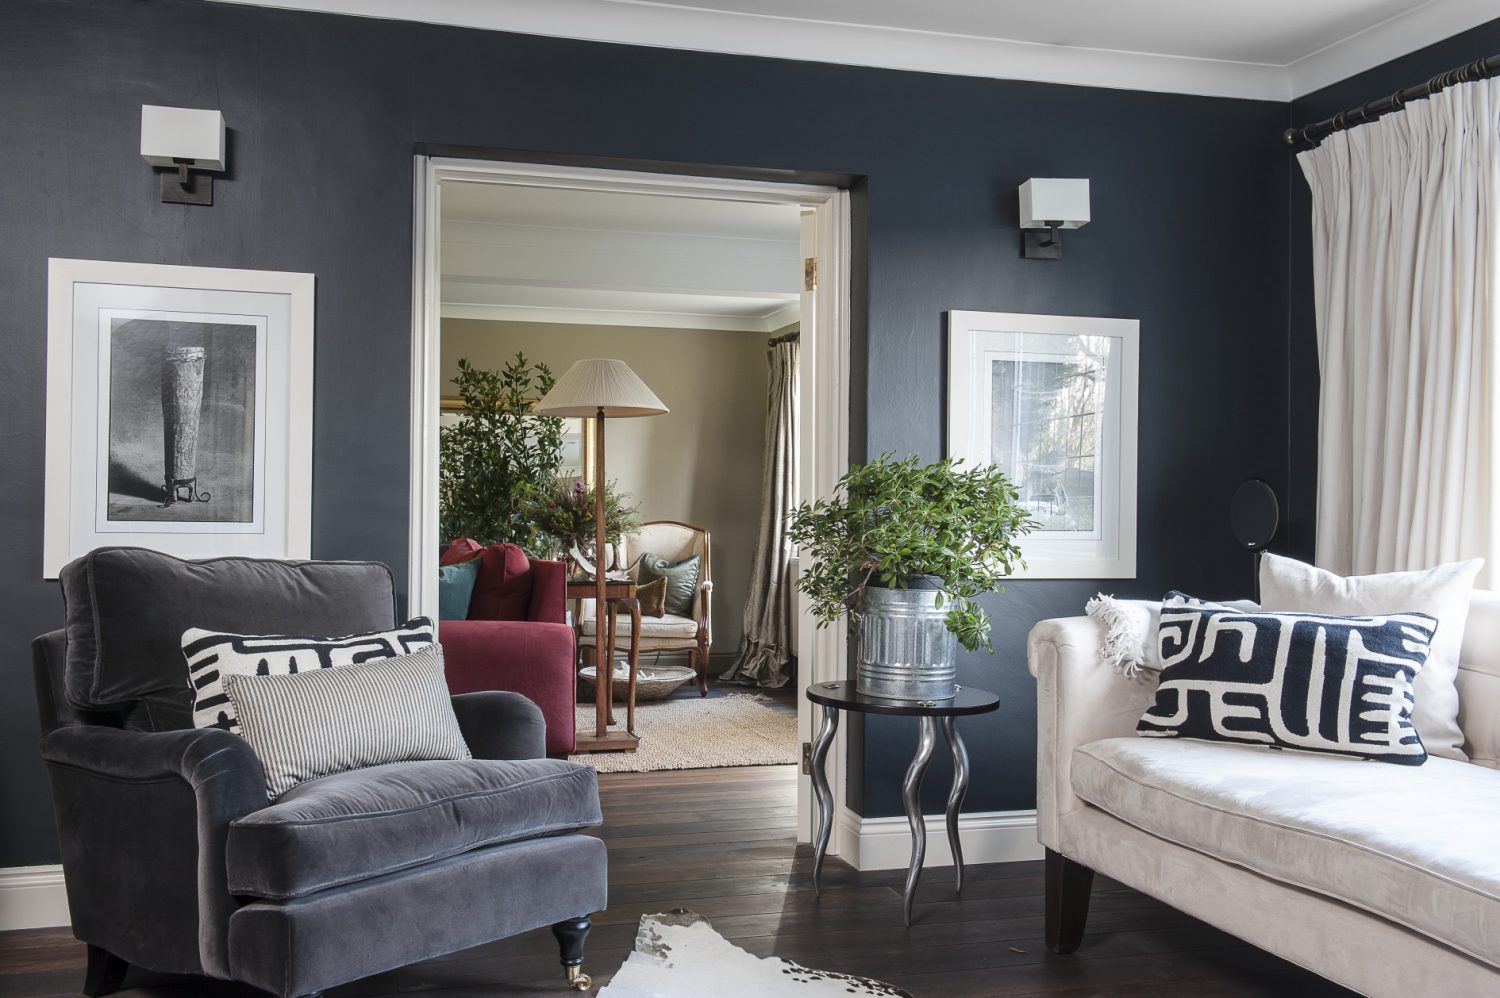 The walls of the grown-ups’ snug, painted in Farrow & Ball ‘Off Black’, creates an inviting and cosy evening retreat. “I often think darker colours are more neutral than white,” says Adele. “They often make spaces look larger rather than smaller and add depth and warmth.” The sofa is flanked by two superb tables with brushed aluminium legs in the shape of kudu horns